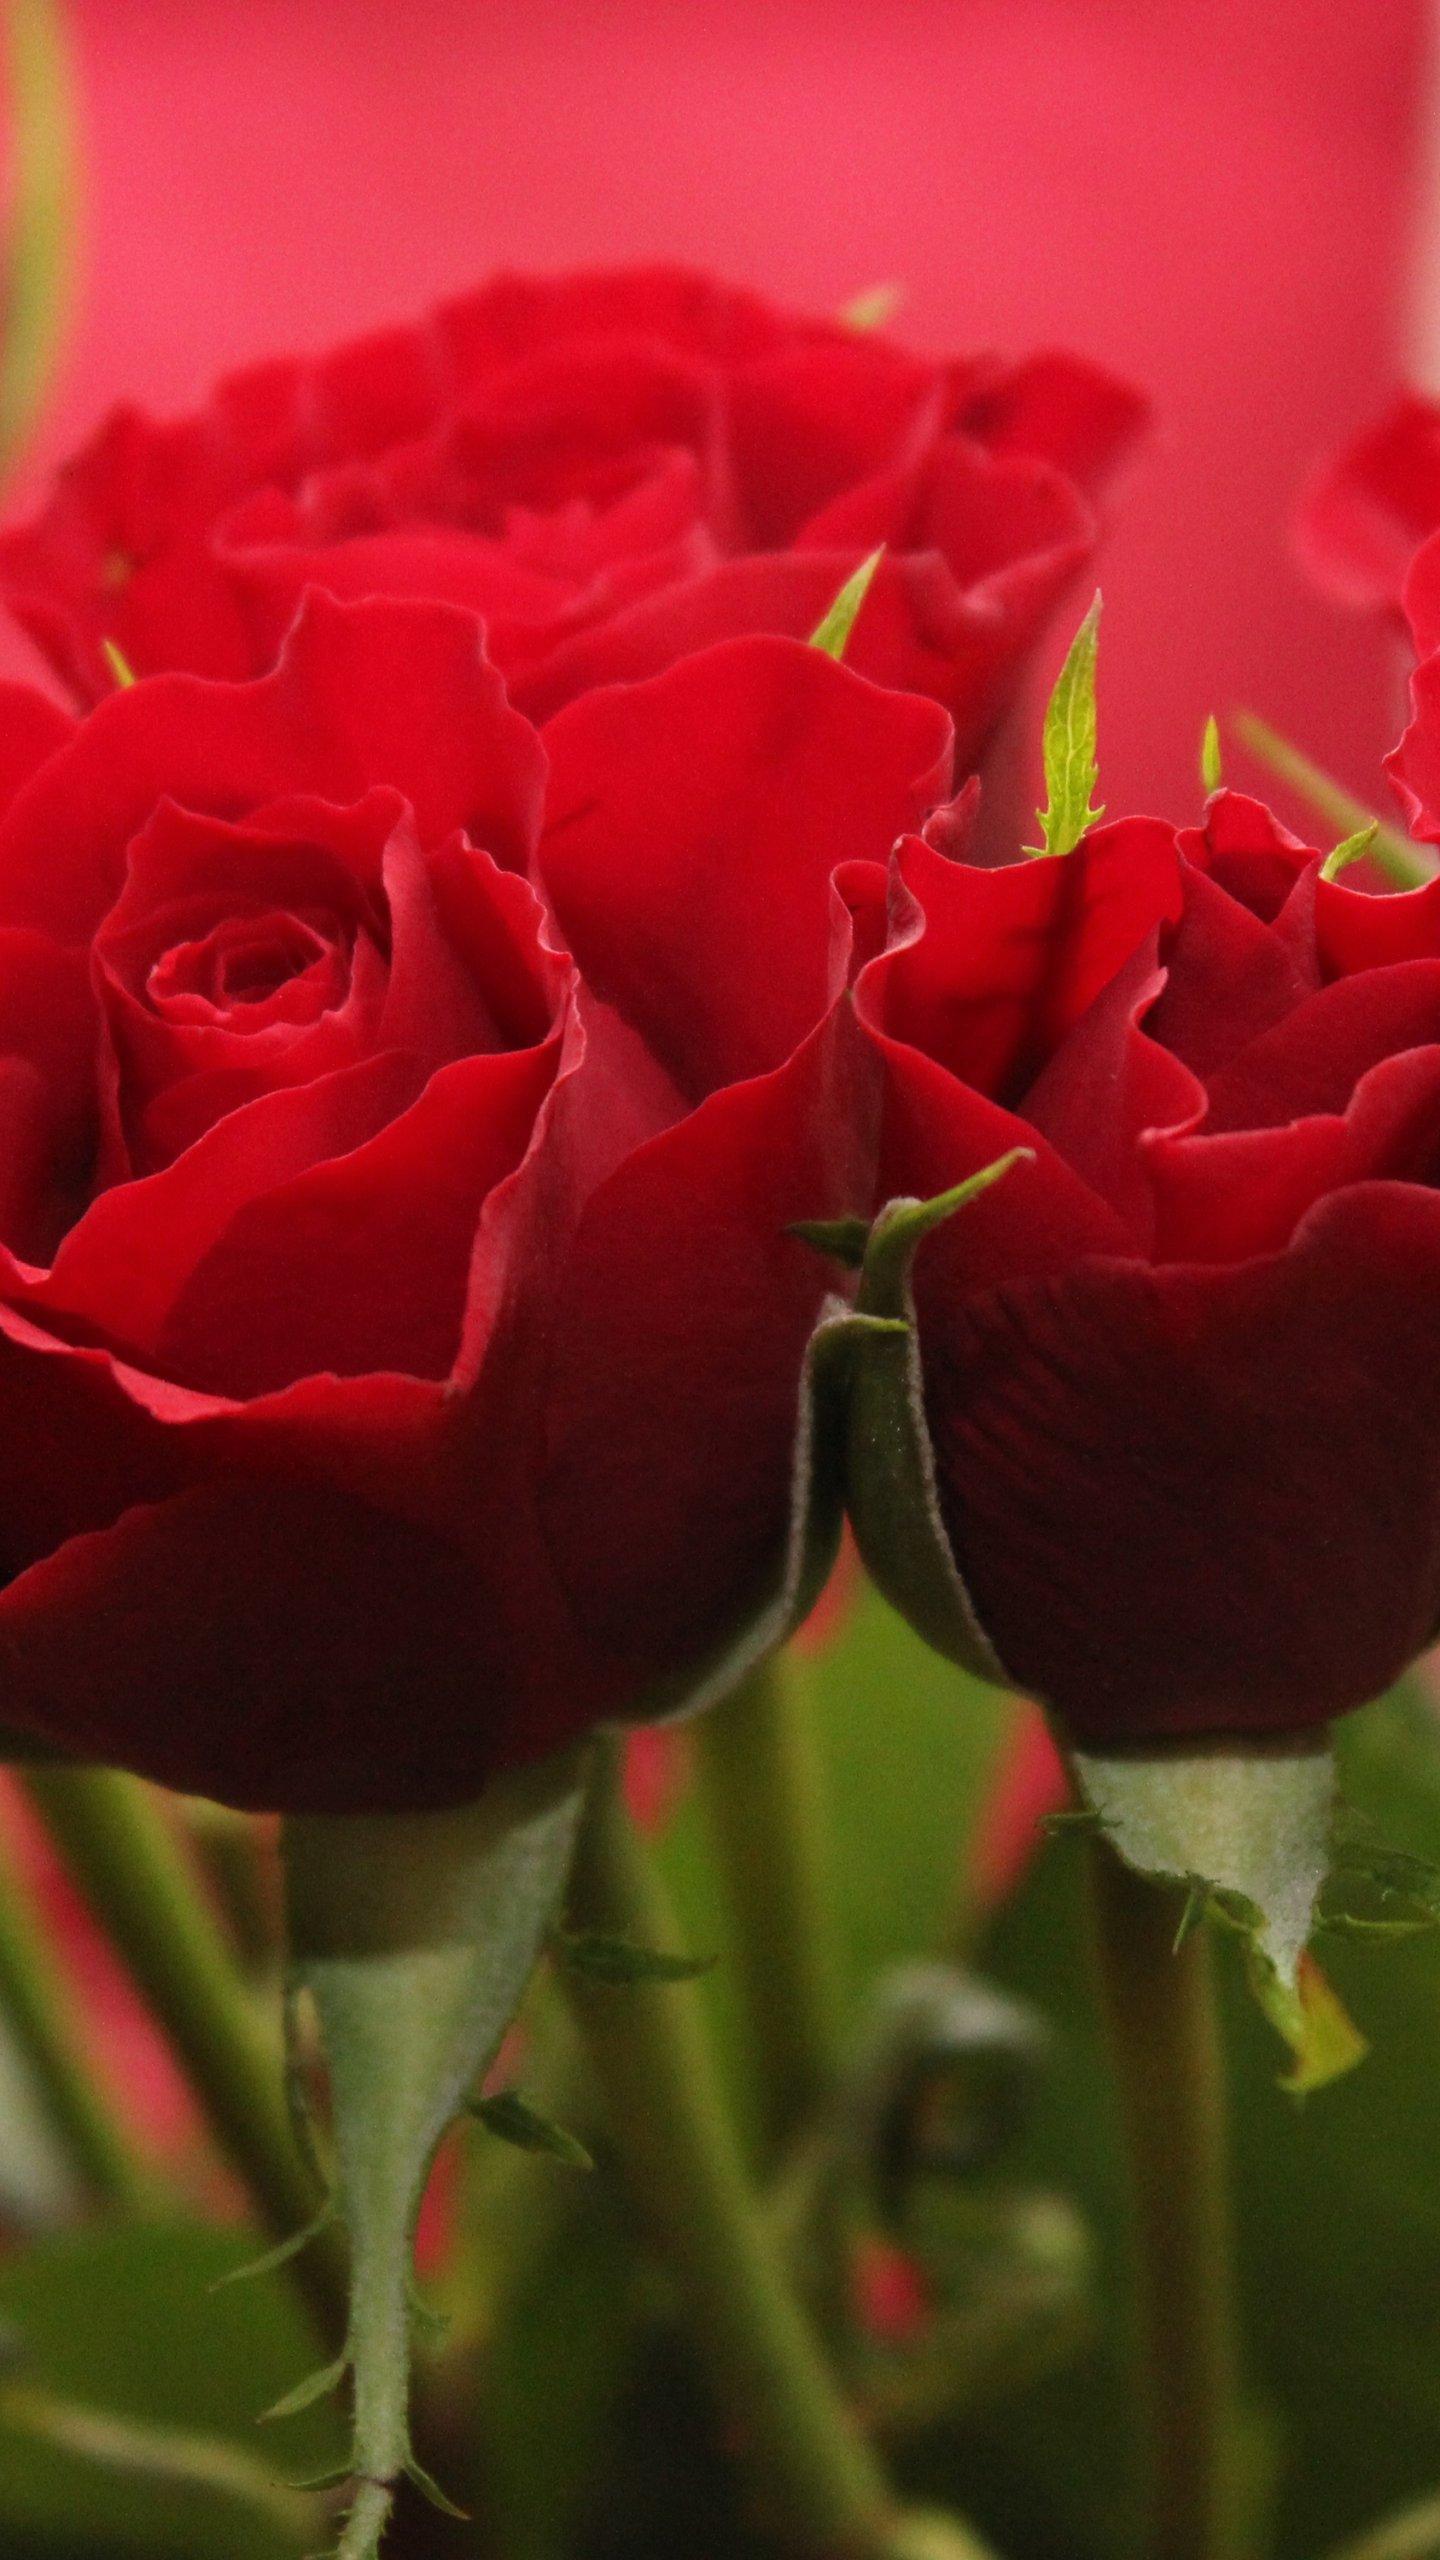 Red Roses Wallpaper, Android & Desktop Background